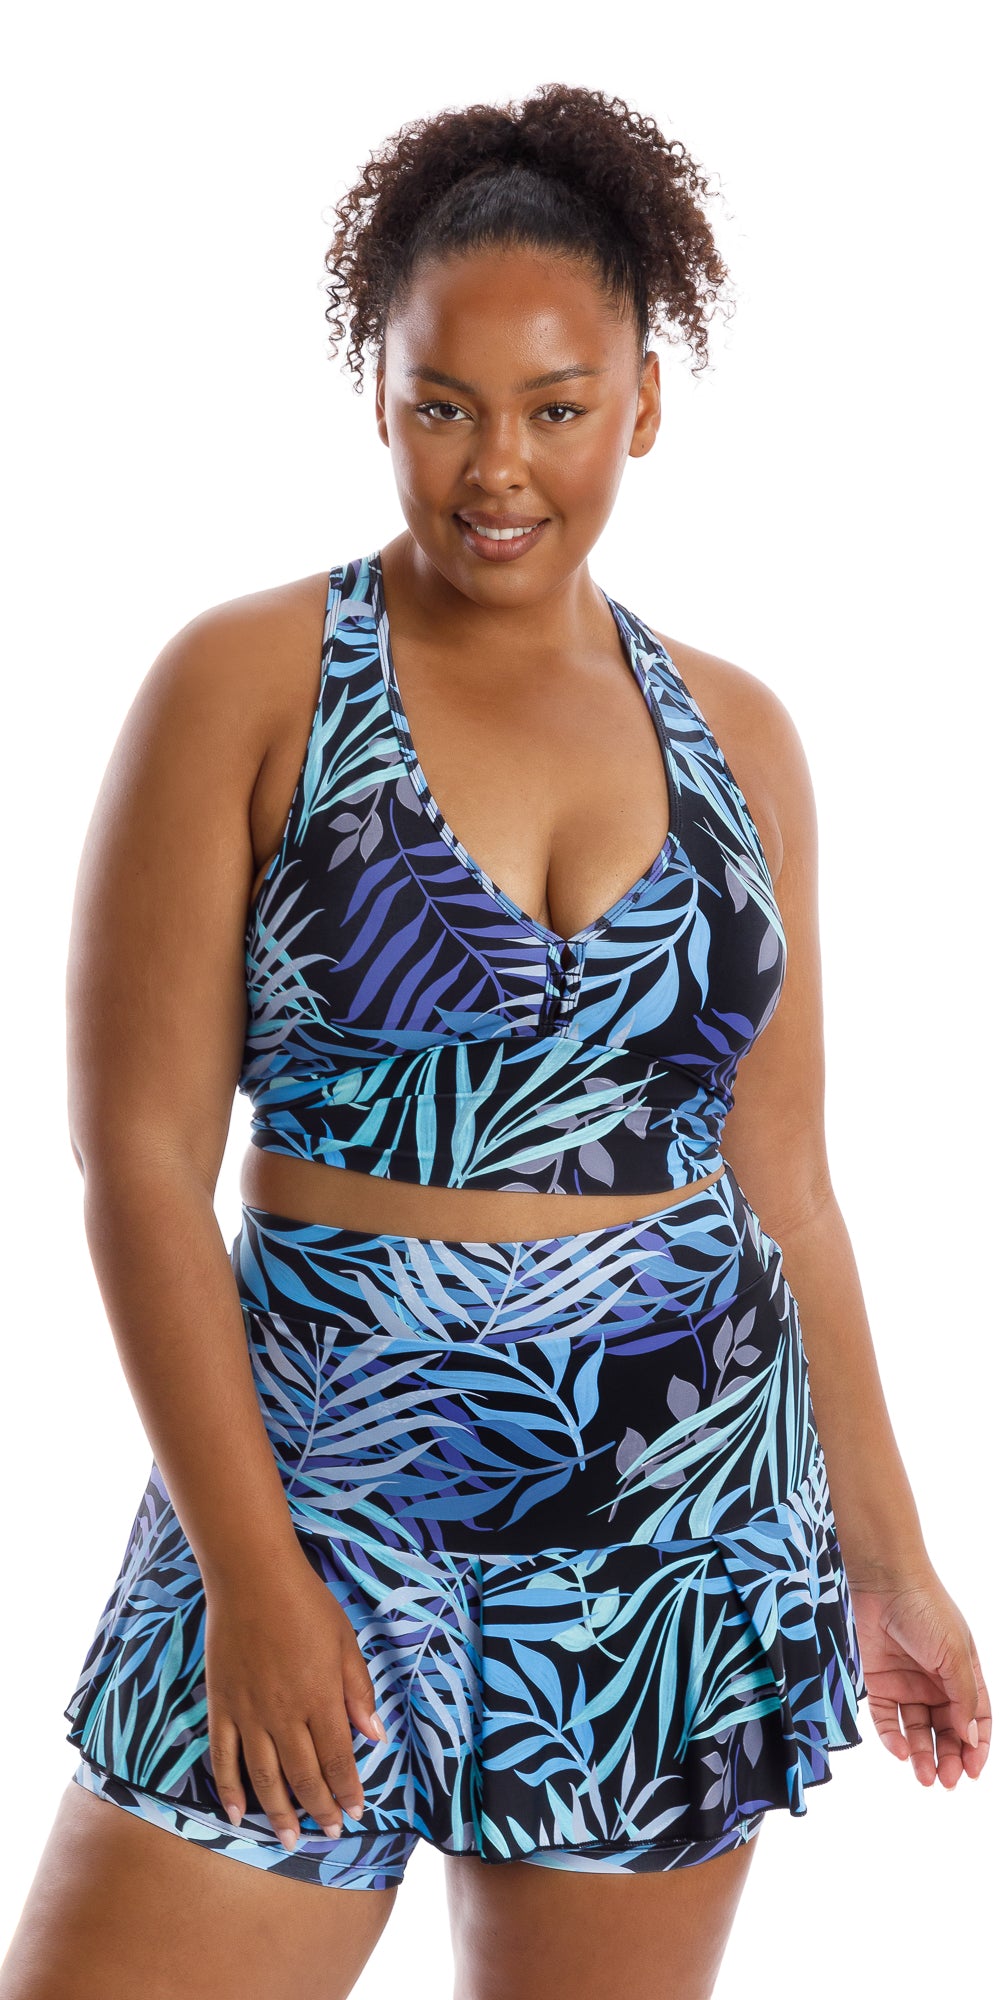 Front view of lady in black and blue Tropical Palm Skort with Pockets and matching bra putting one hand on lap while looking straight to the camera